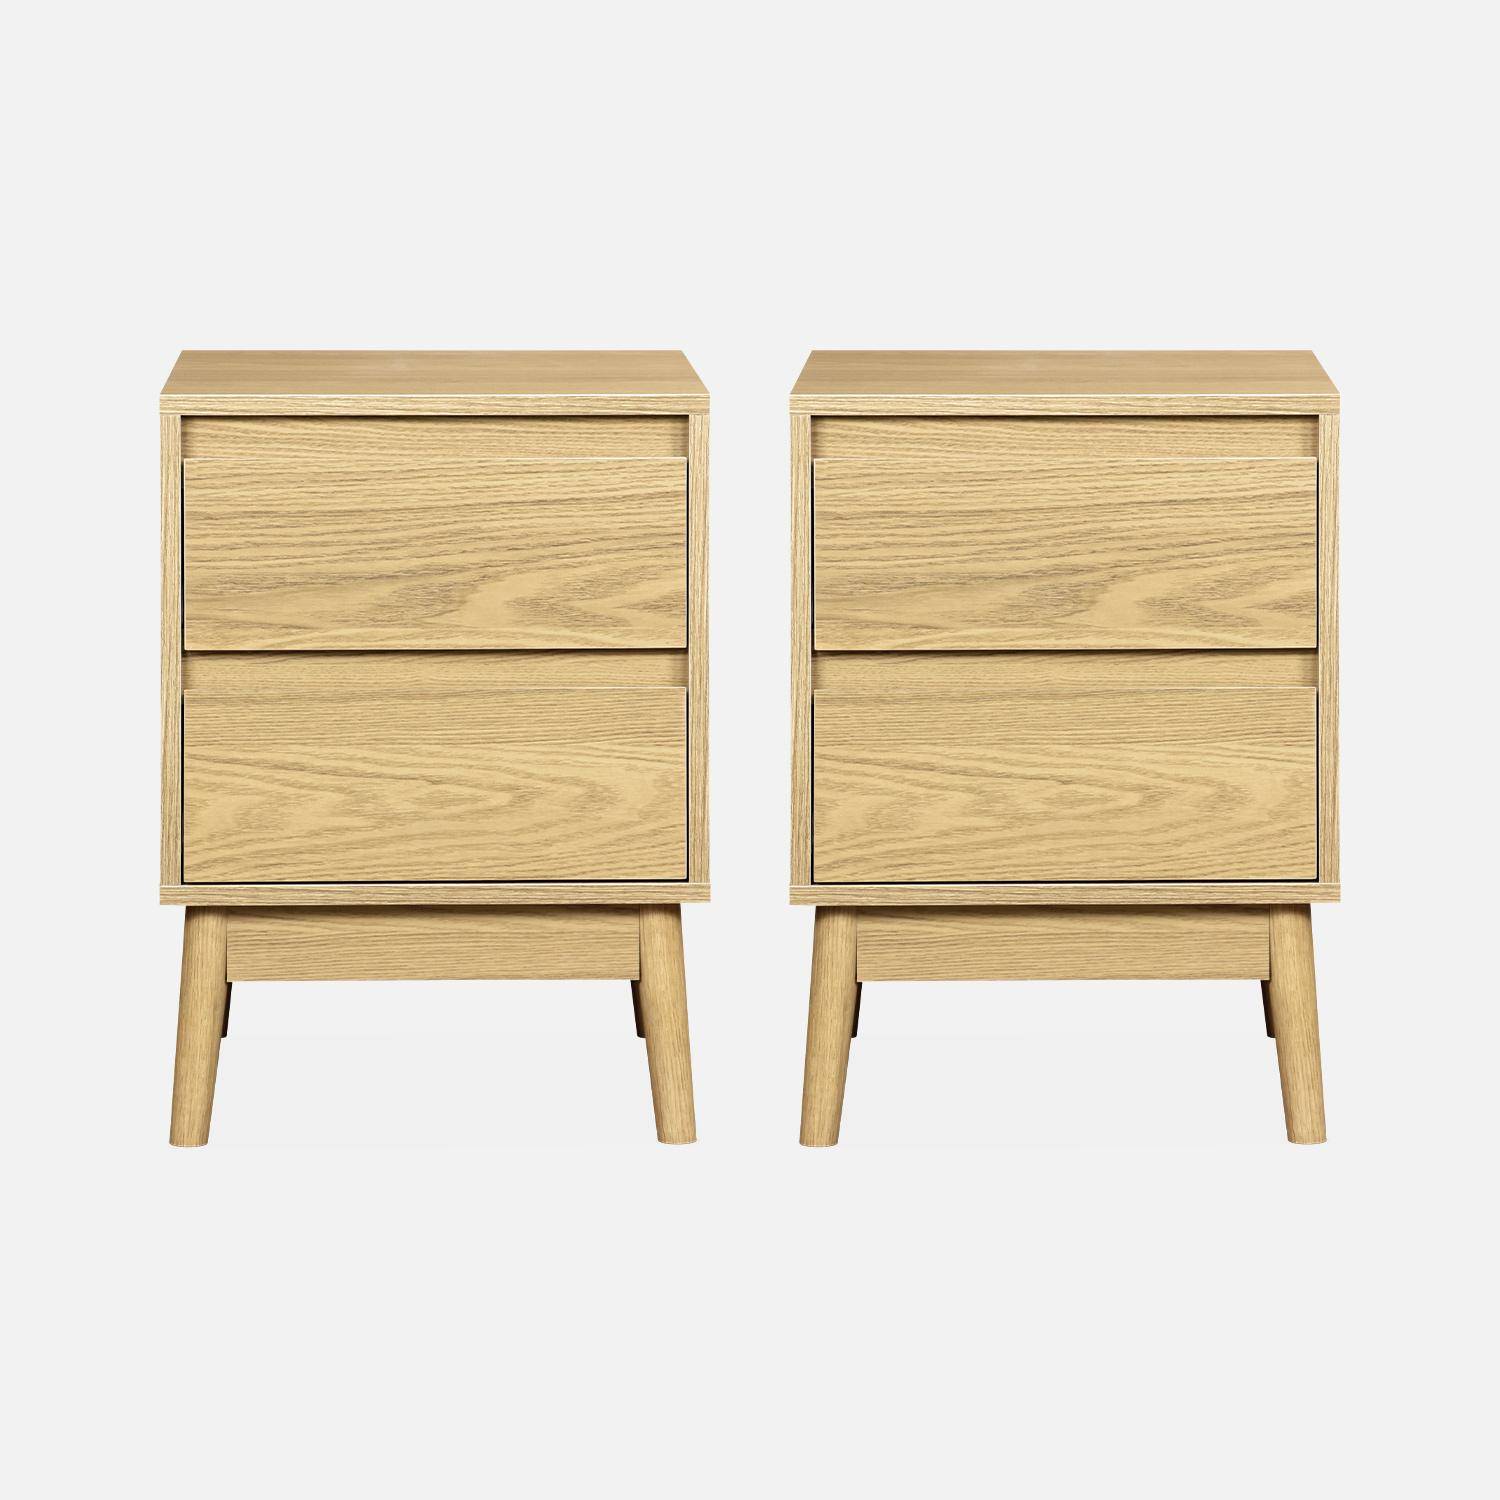 Pair of bedside tables with 2 drawers, 26x40x56cm - Dune - Natural,sweeek,Photo4